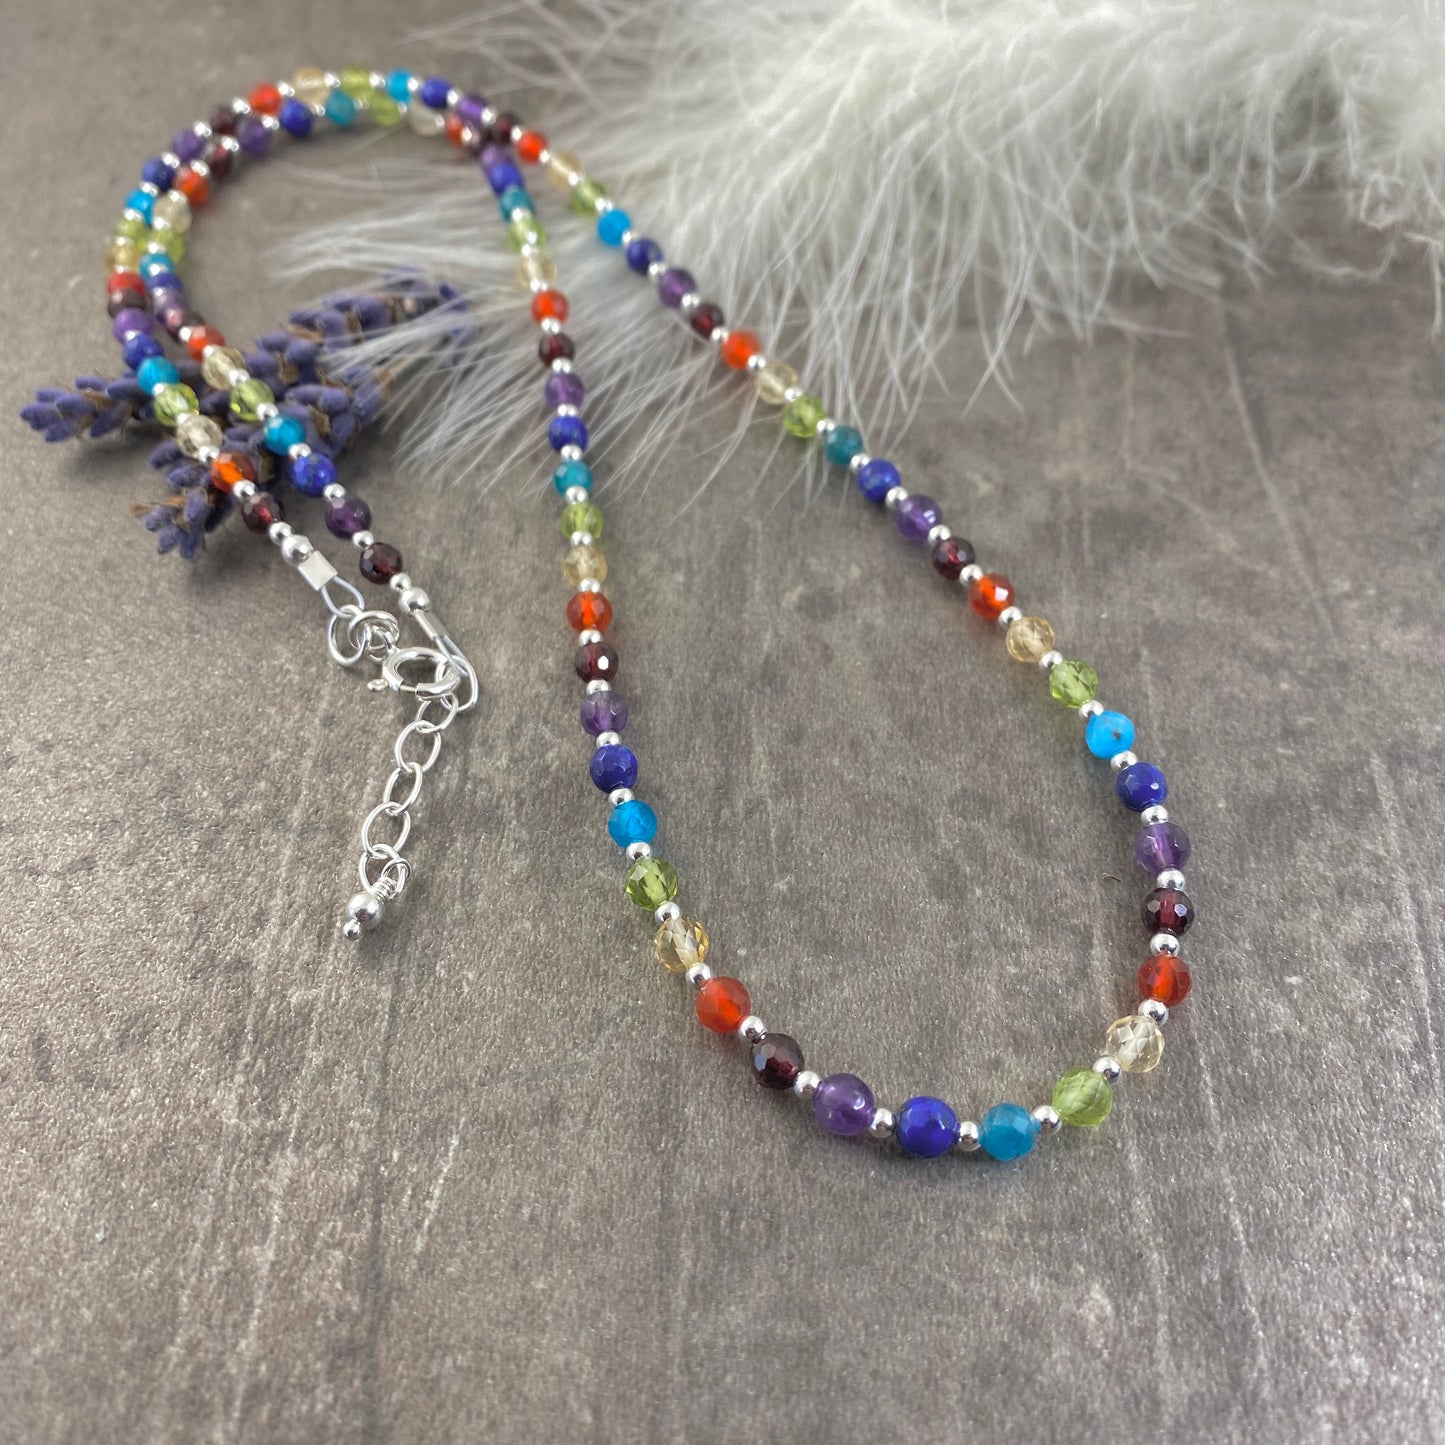 Rainbow Necklace, rainbow gemstones with sterling silver